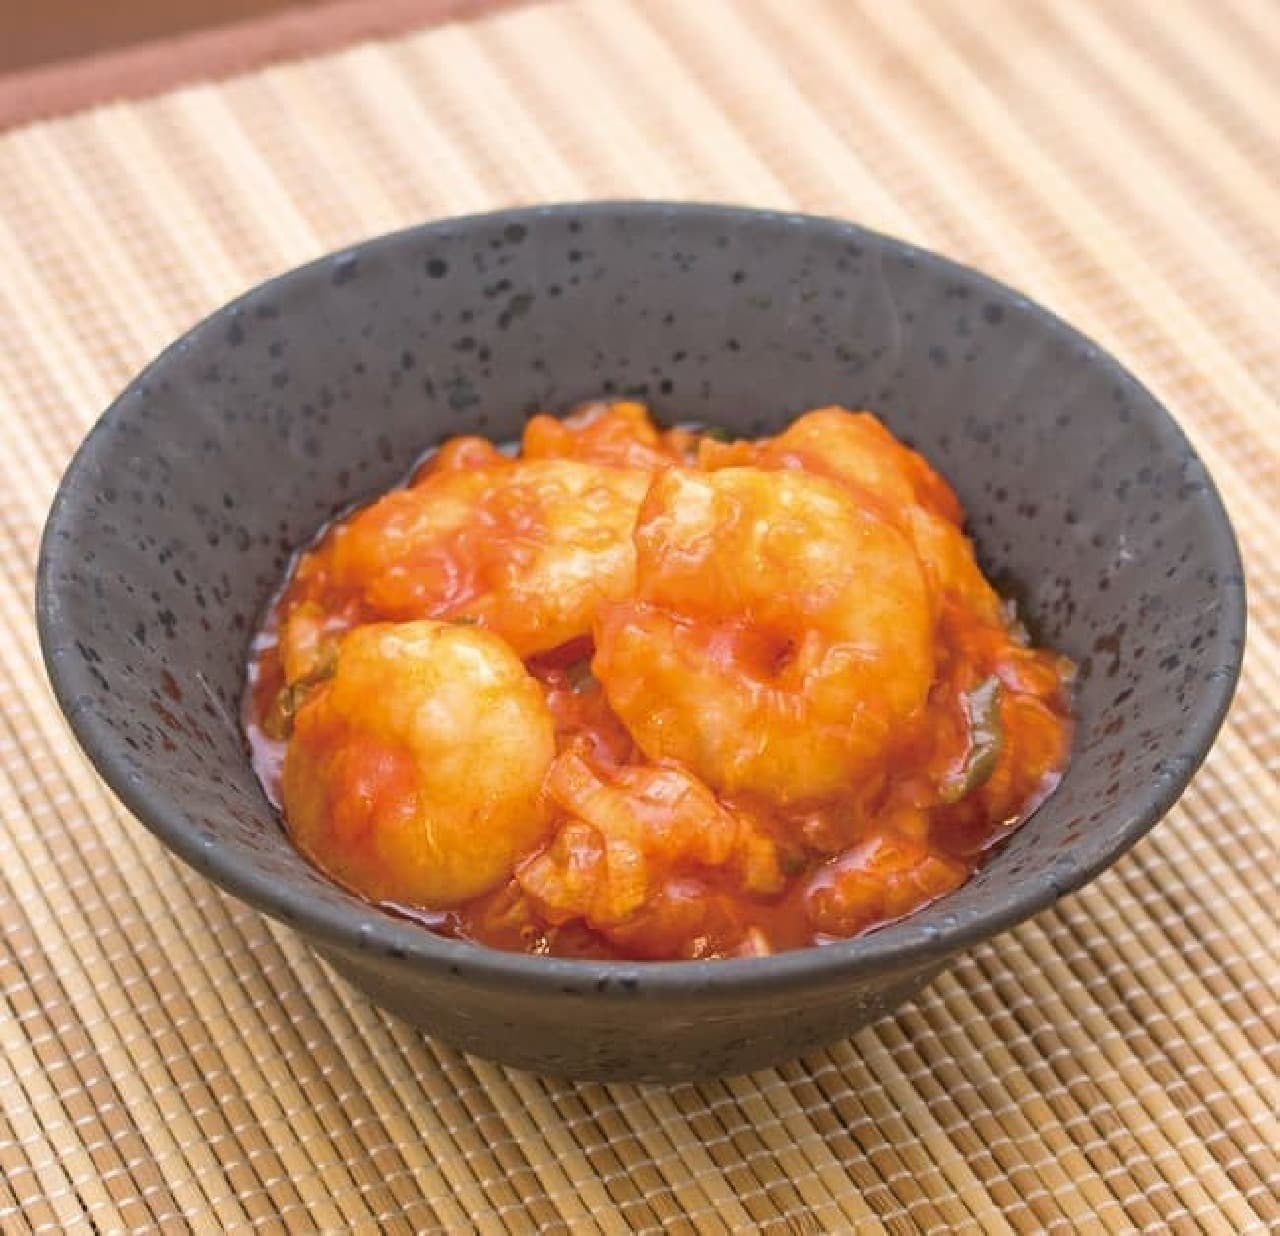 Aeon "3 kinds of acclaimed soy sauce shrimp chili"